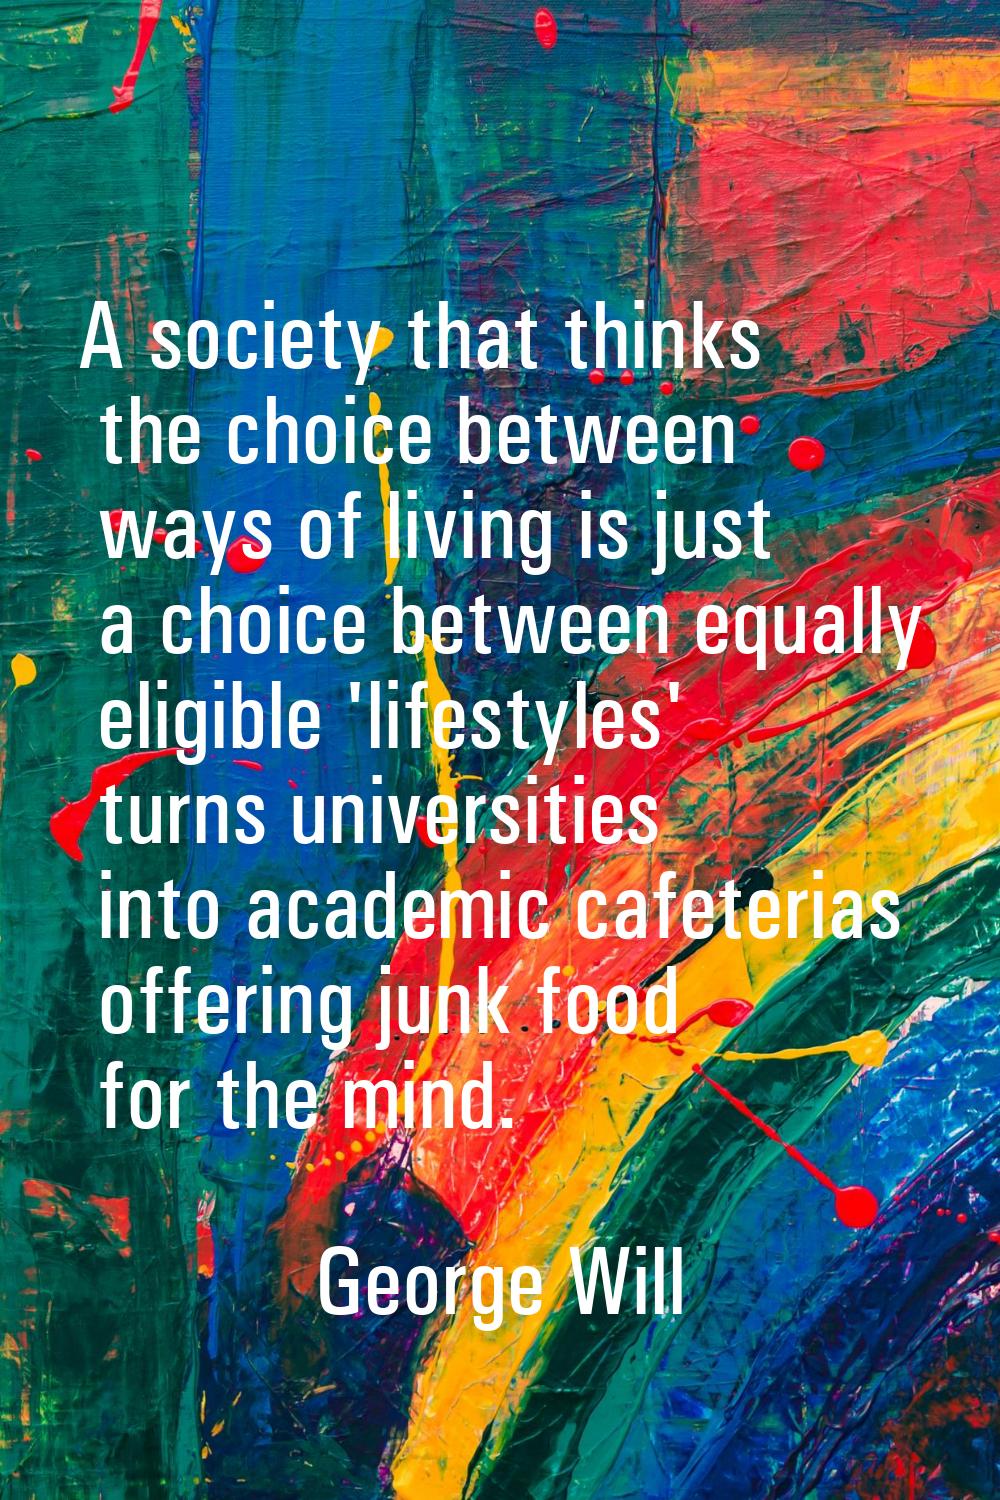 A society that thinks the choice between ways of living is just a choice between equally eligible '